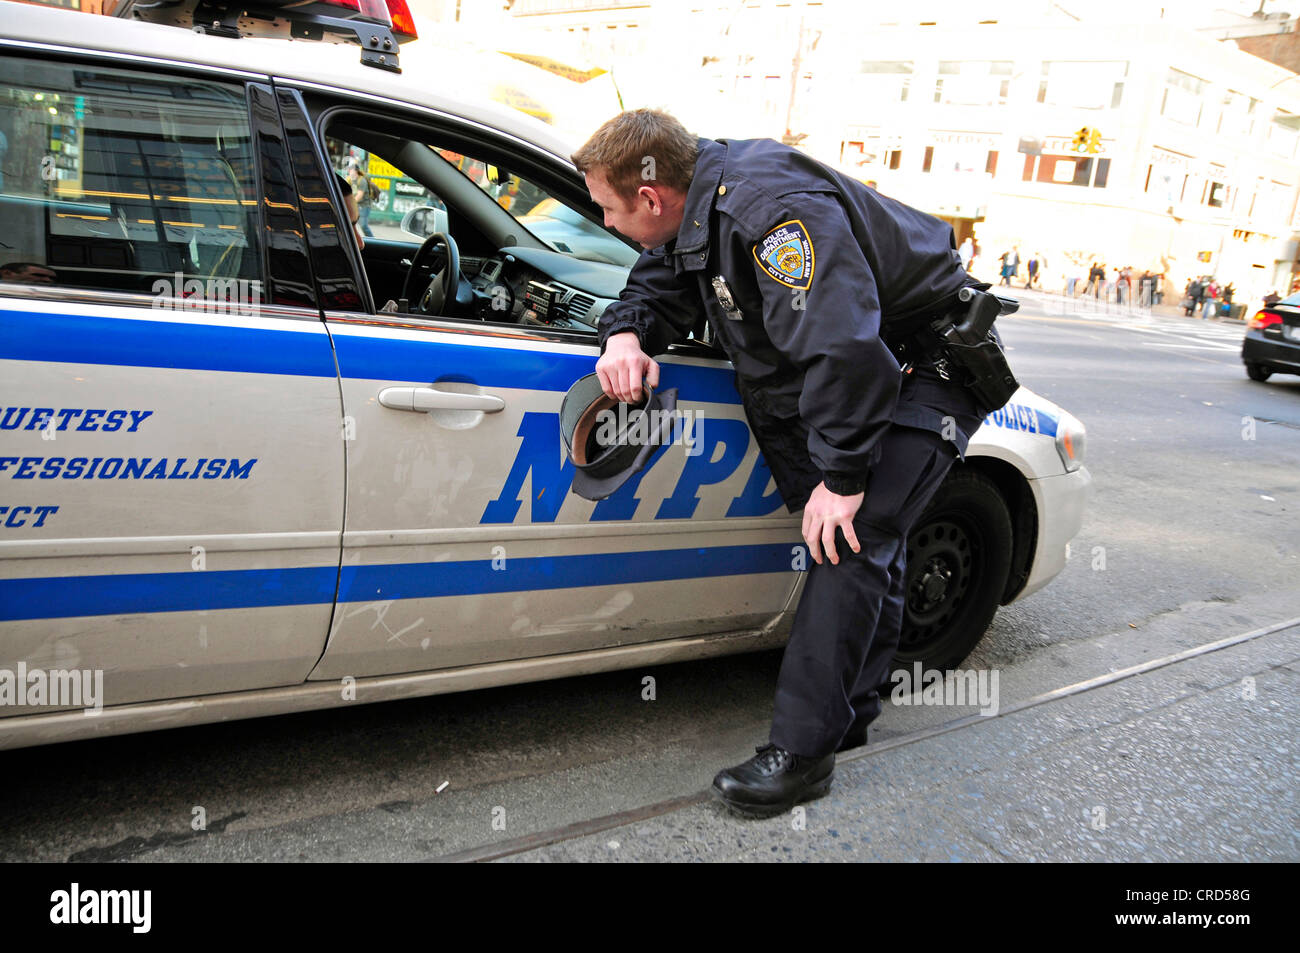 police officer of the NYPD talking to some other police men in a police car, USA, New York City, Manhattan Stock Photo